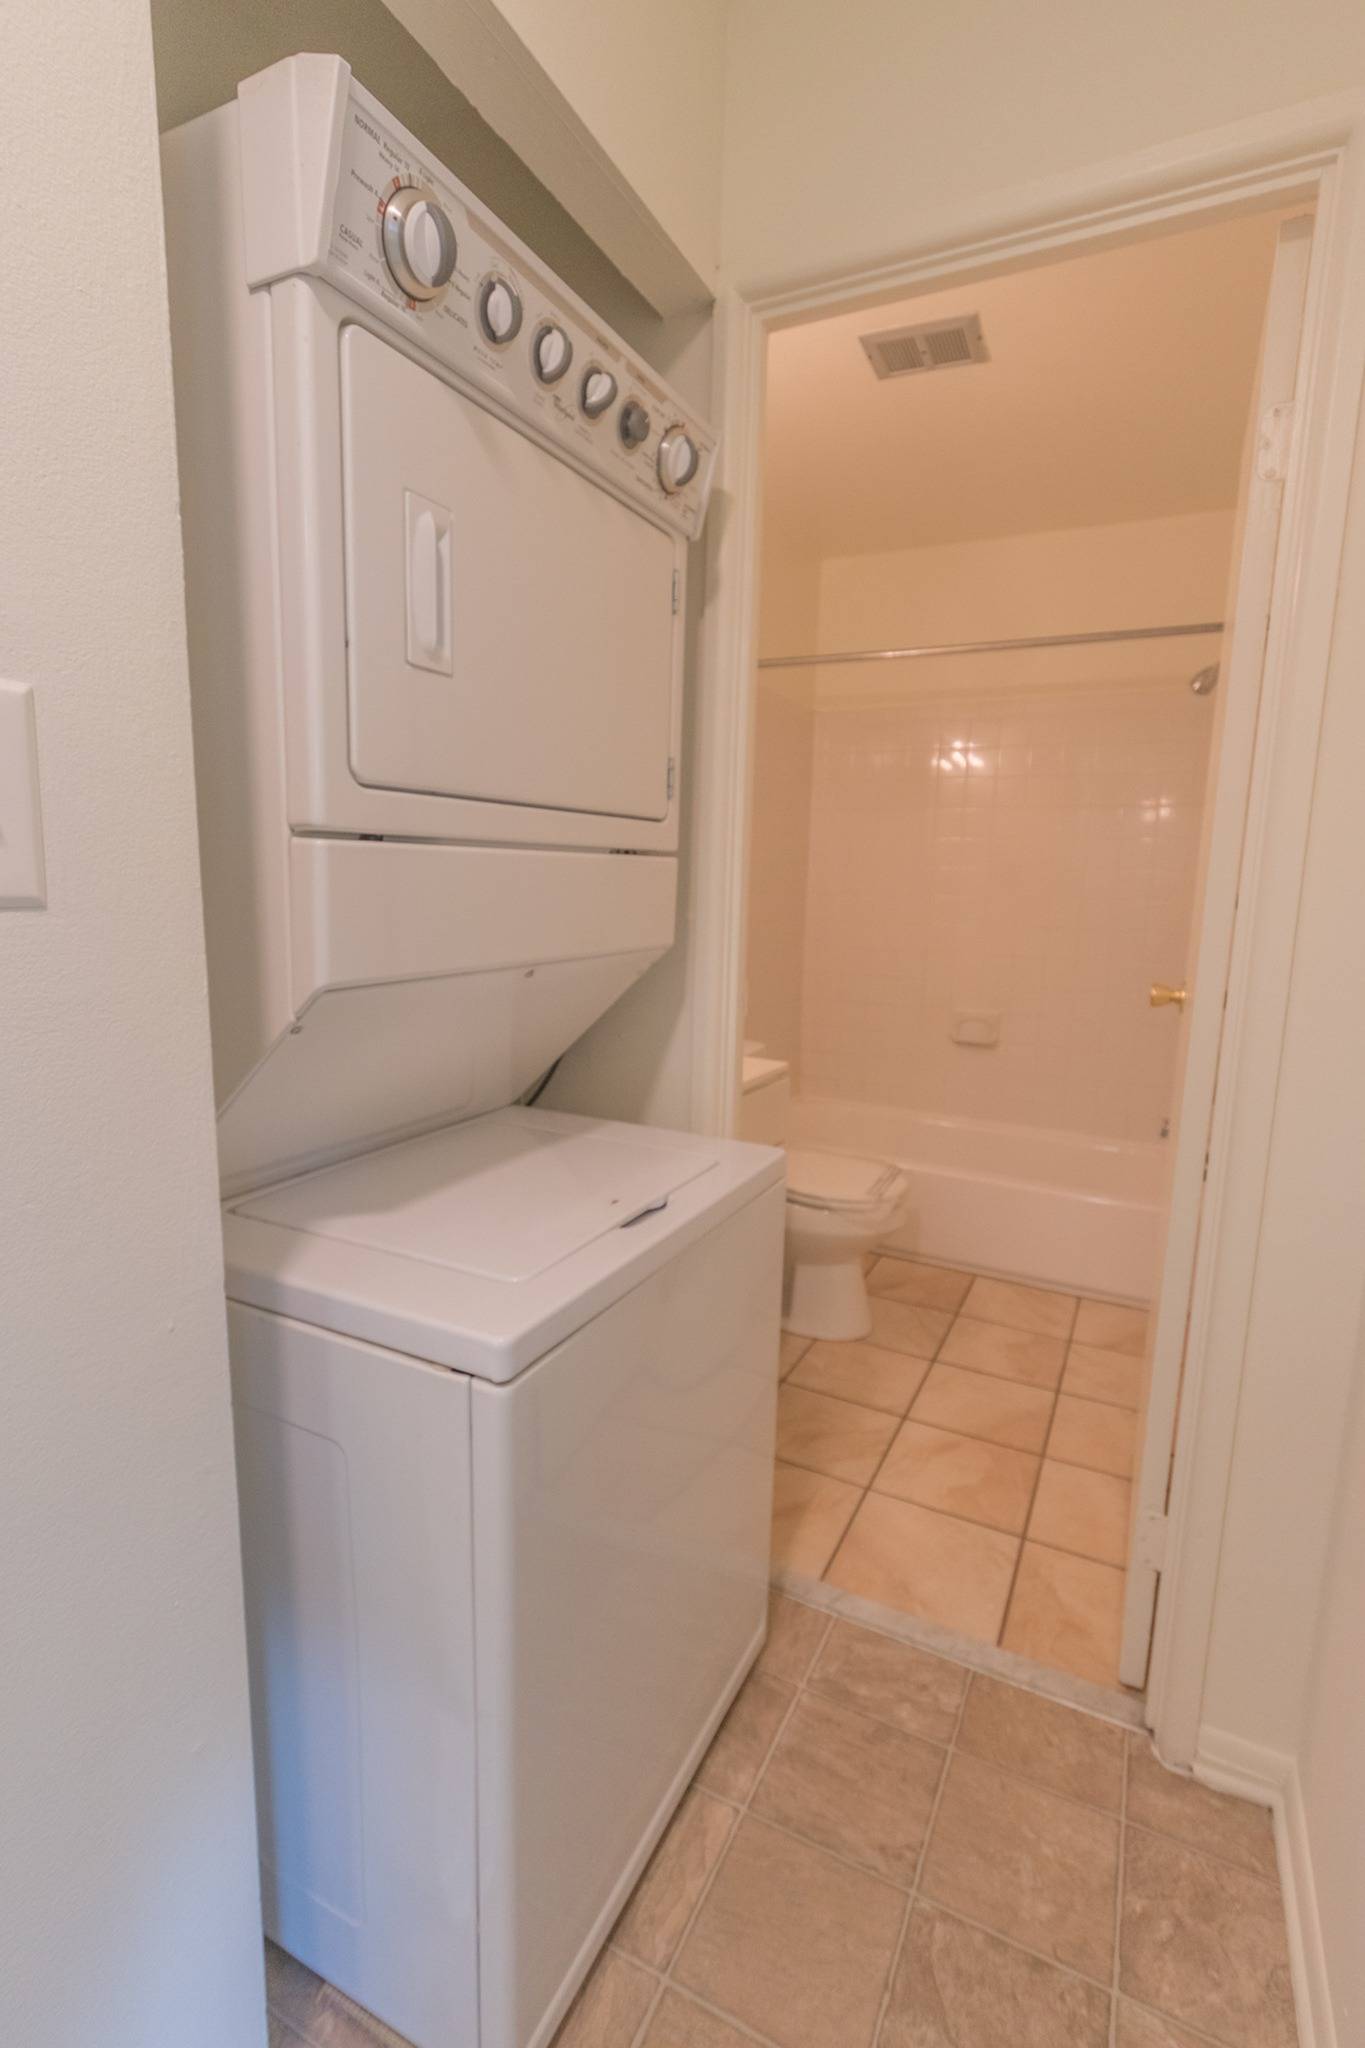 The in unit washer & dryer area of an apartment, next to bathroom area, fitted with a washer, & dryer